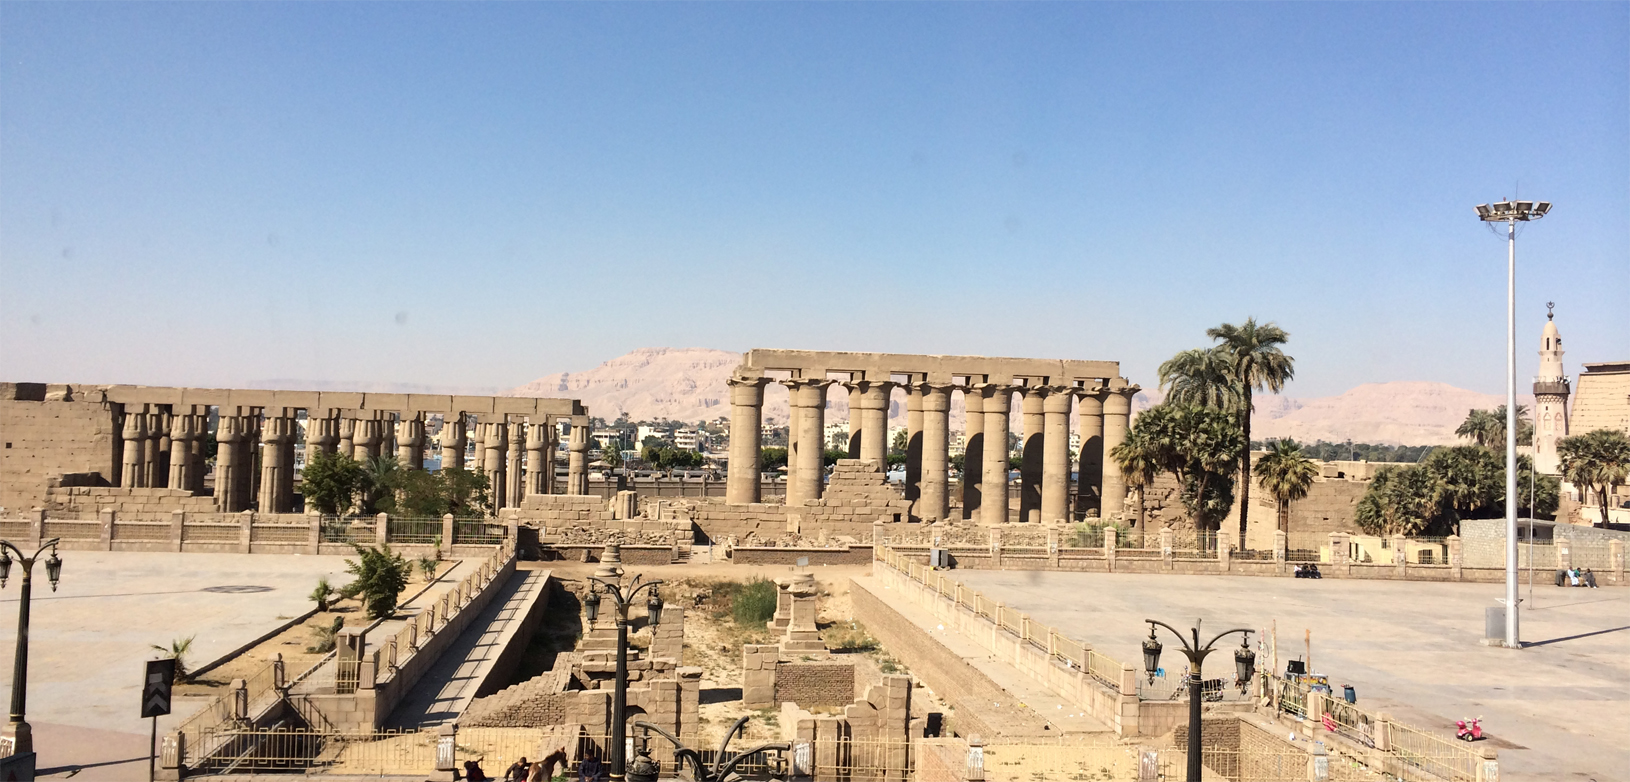 Luxor temple overview from the city